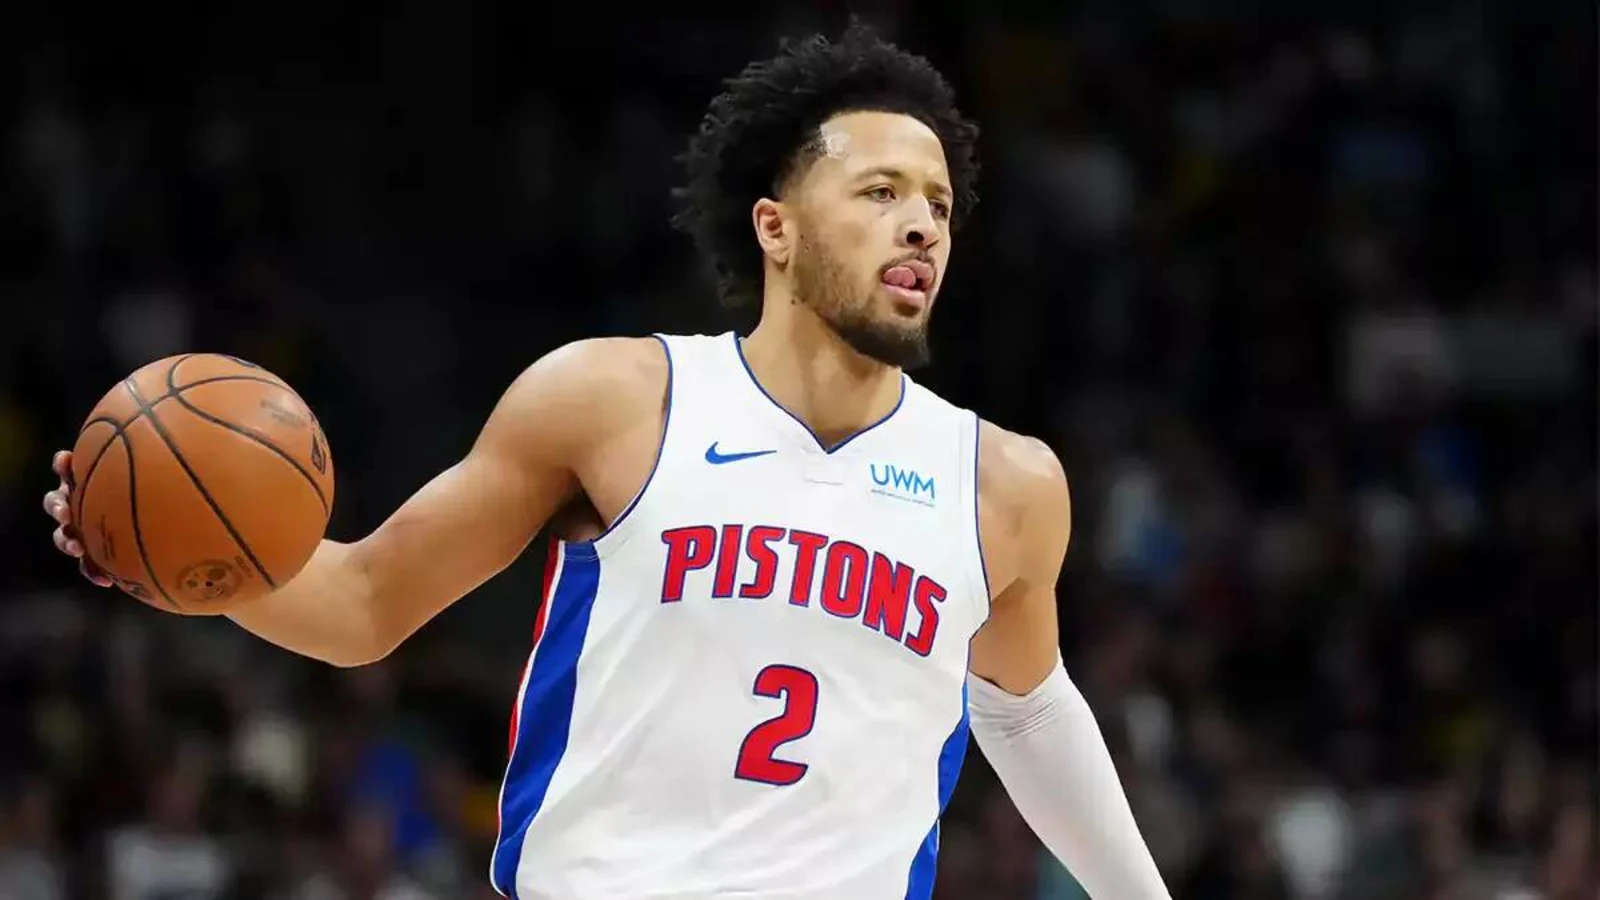 Why Cade Cunningham’s lack of free throws has become glaring issue for Pistons